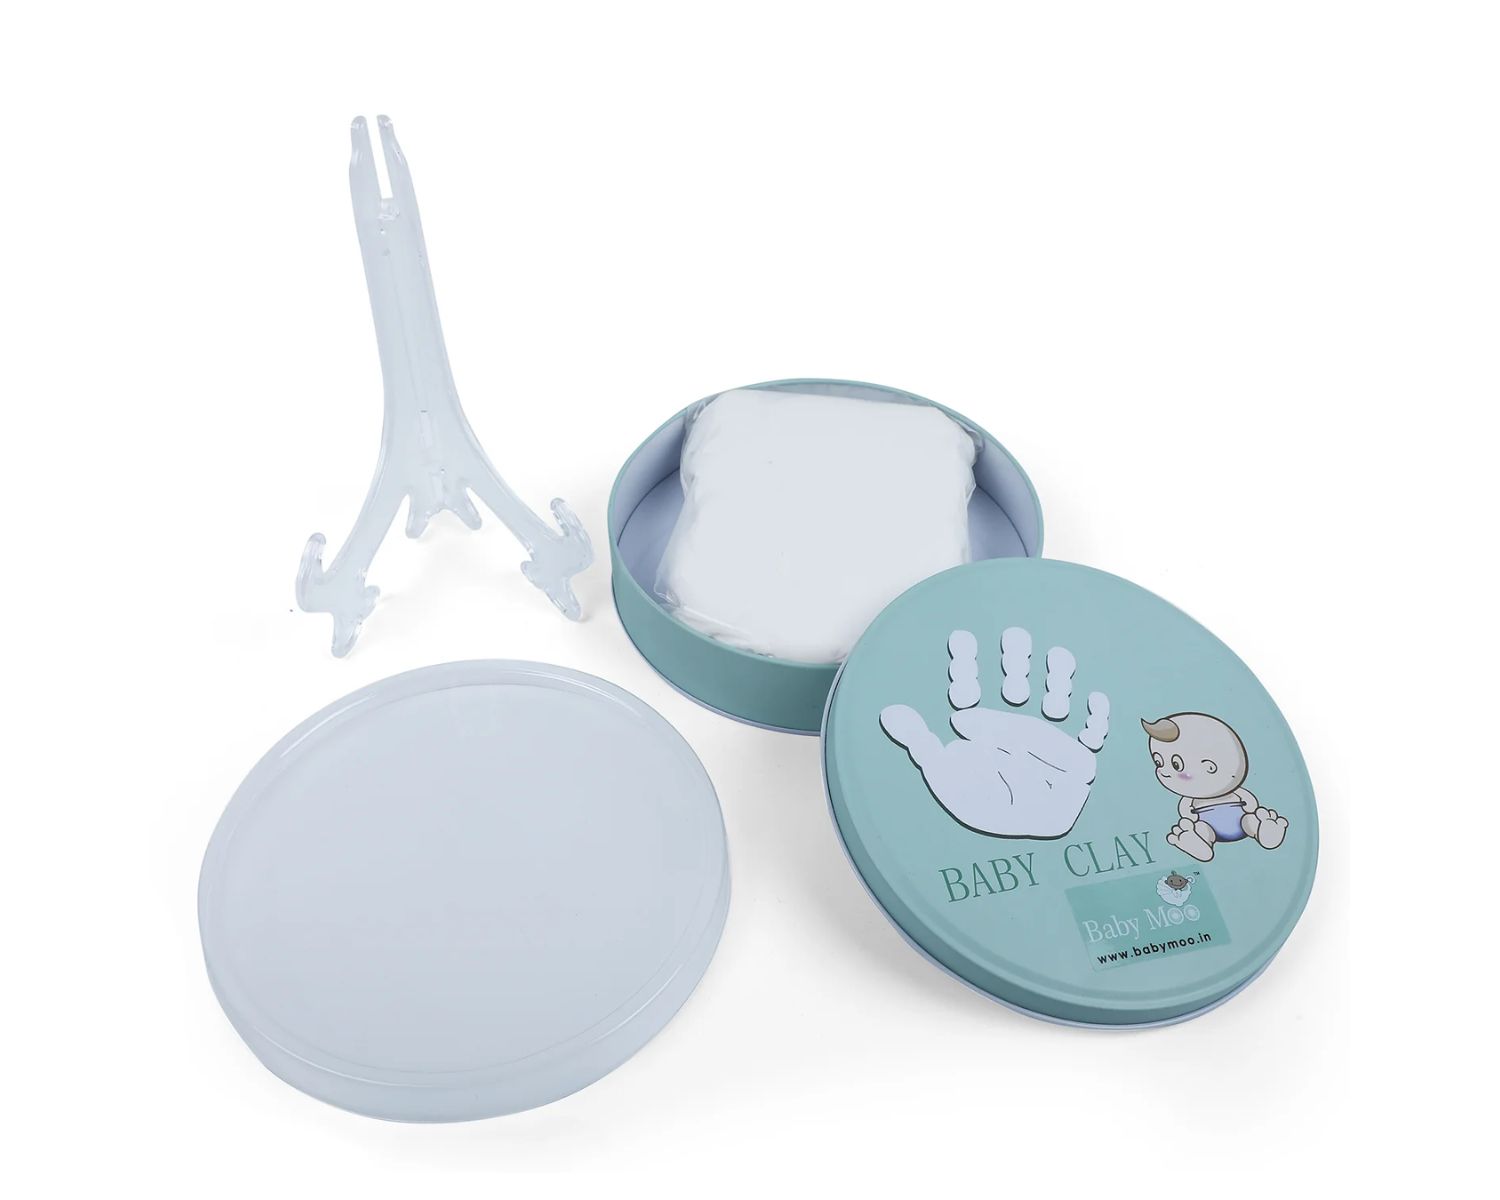 Review: Baby Handprint Clay Kit – A Perfect Keepsake for New Parents